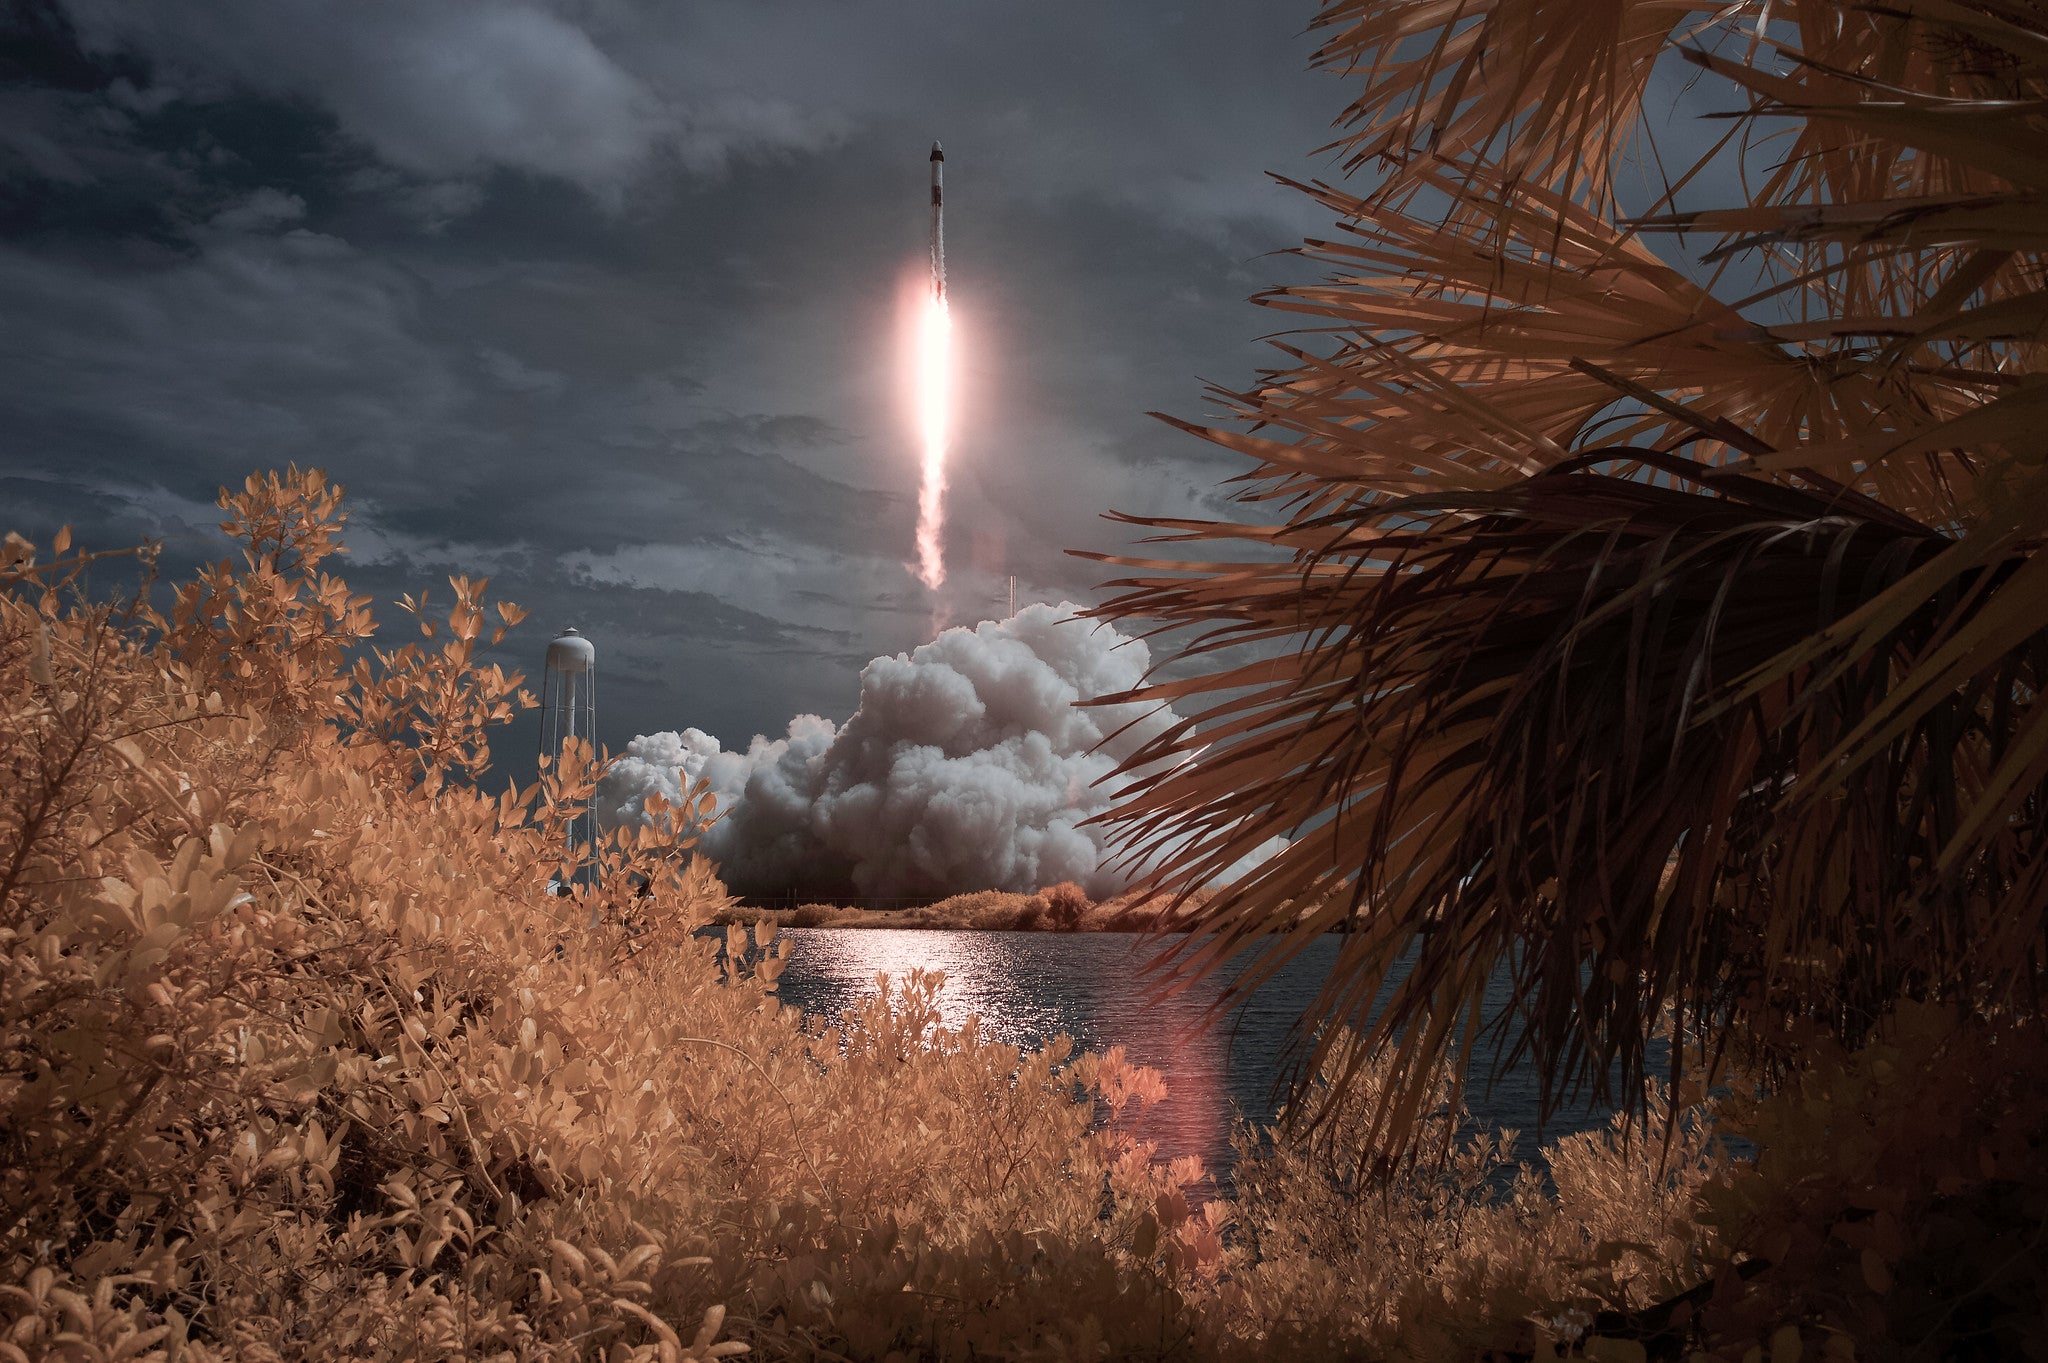 NASA modified SpaceX contract to allow the reuse of previously-flown Falcon 9 rockets